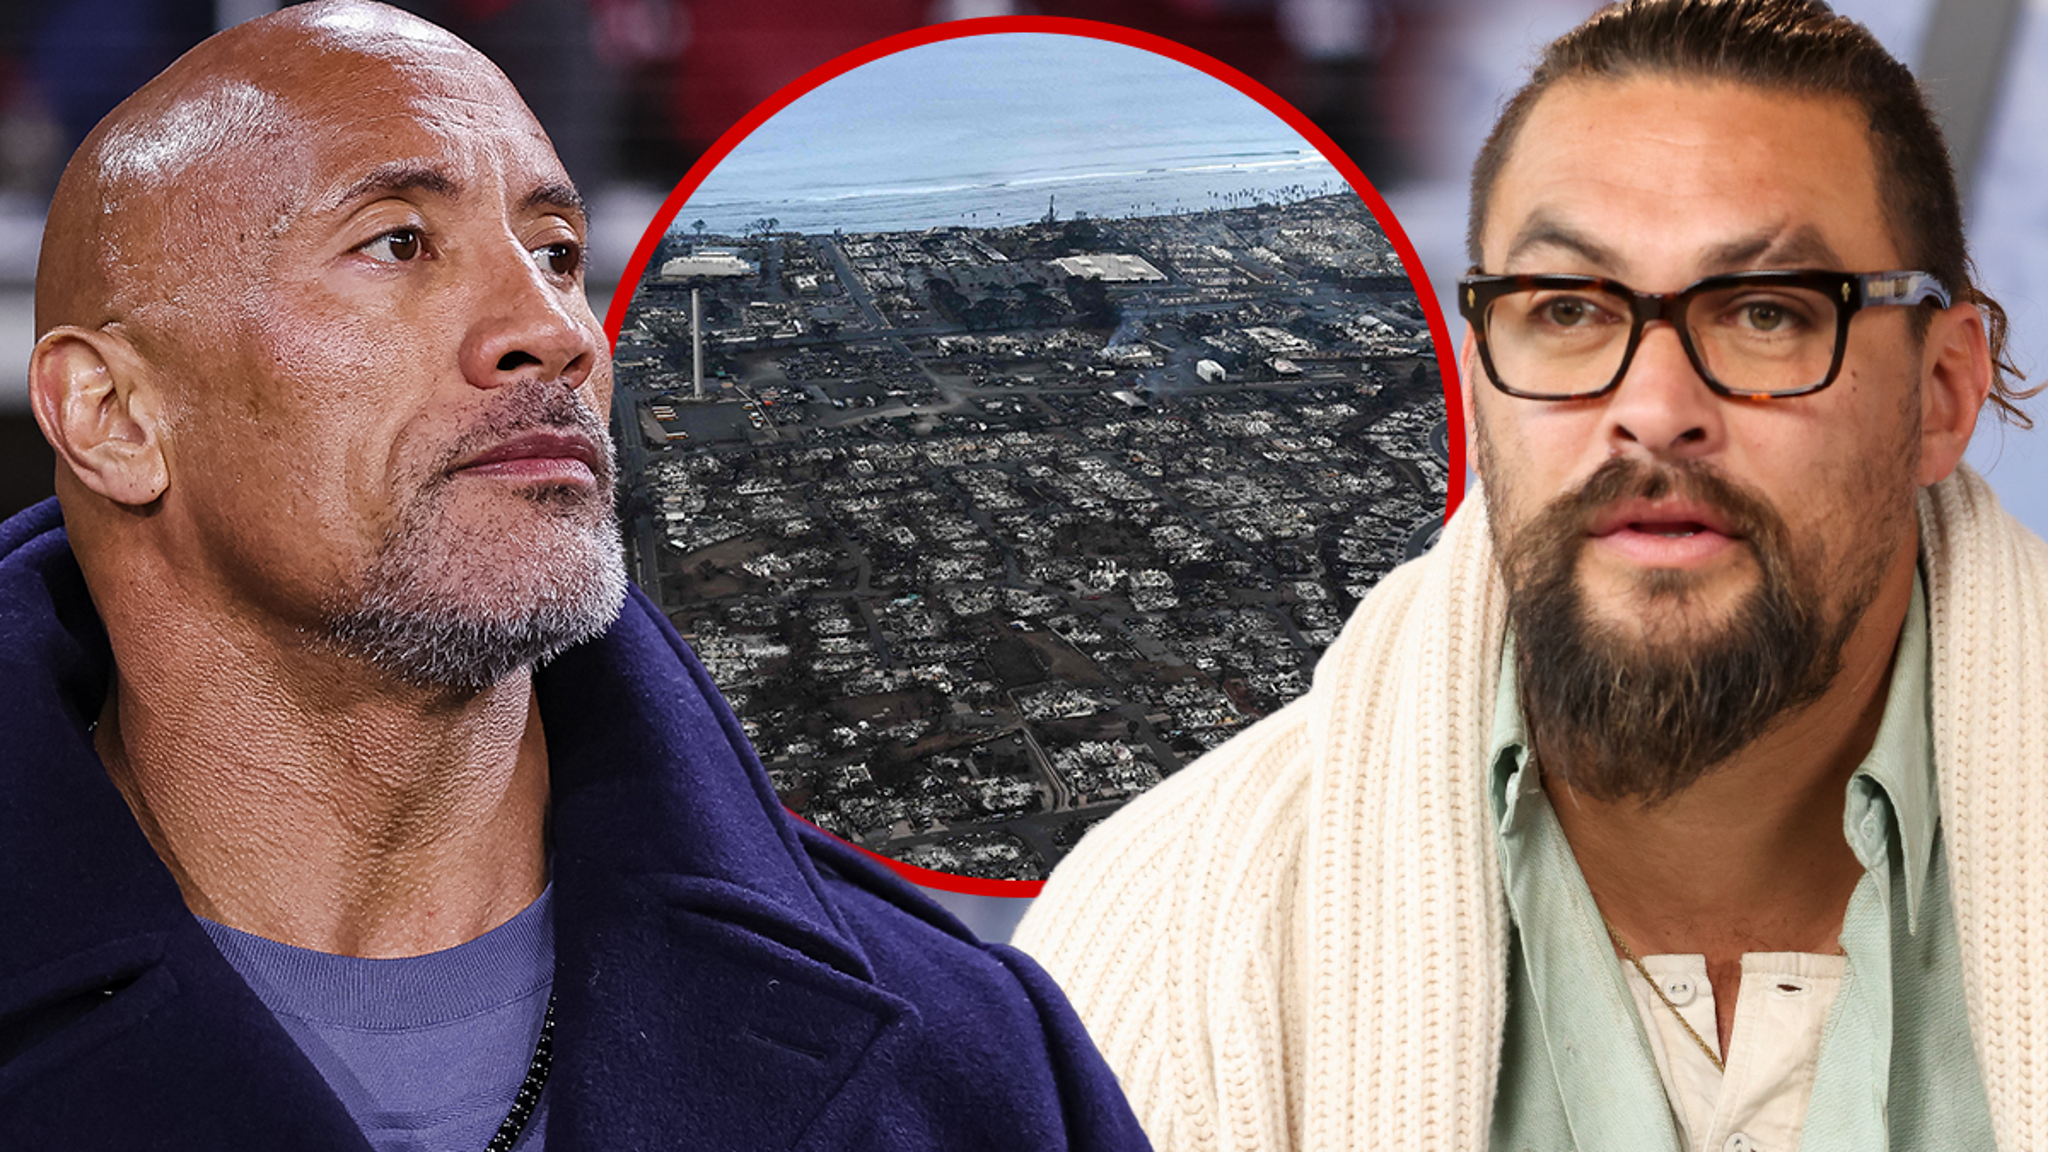 The Rock & Jason Momoa Speak Out on Maui Fires, Offer Ways to Help